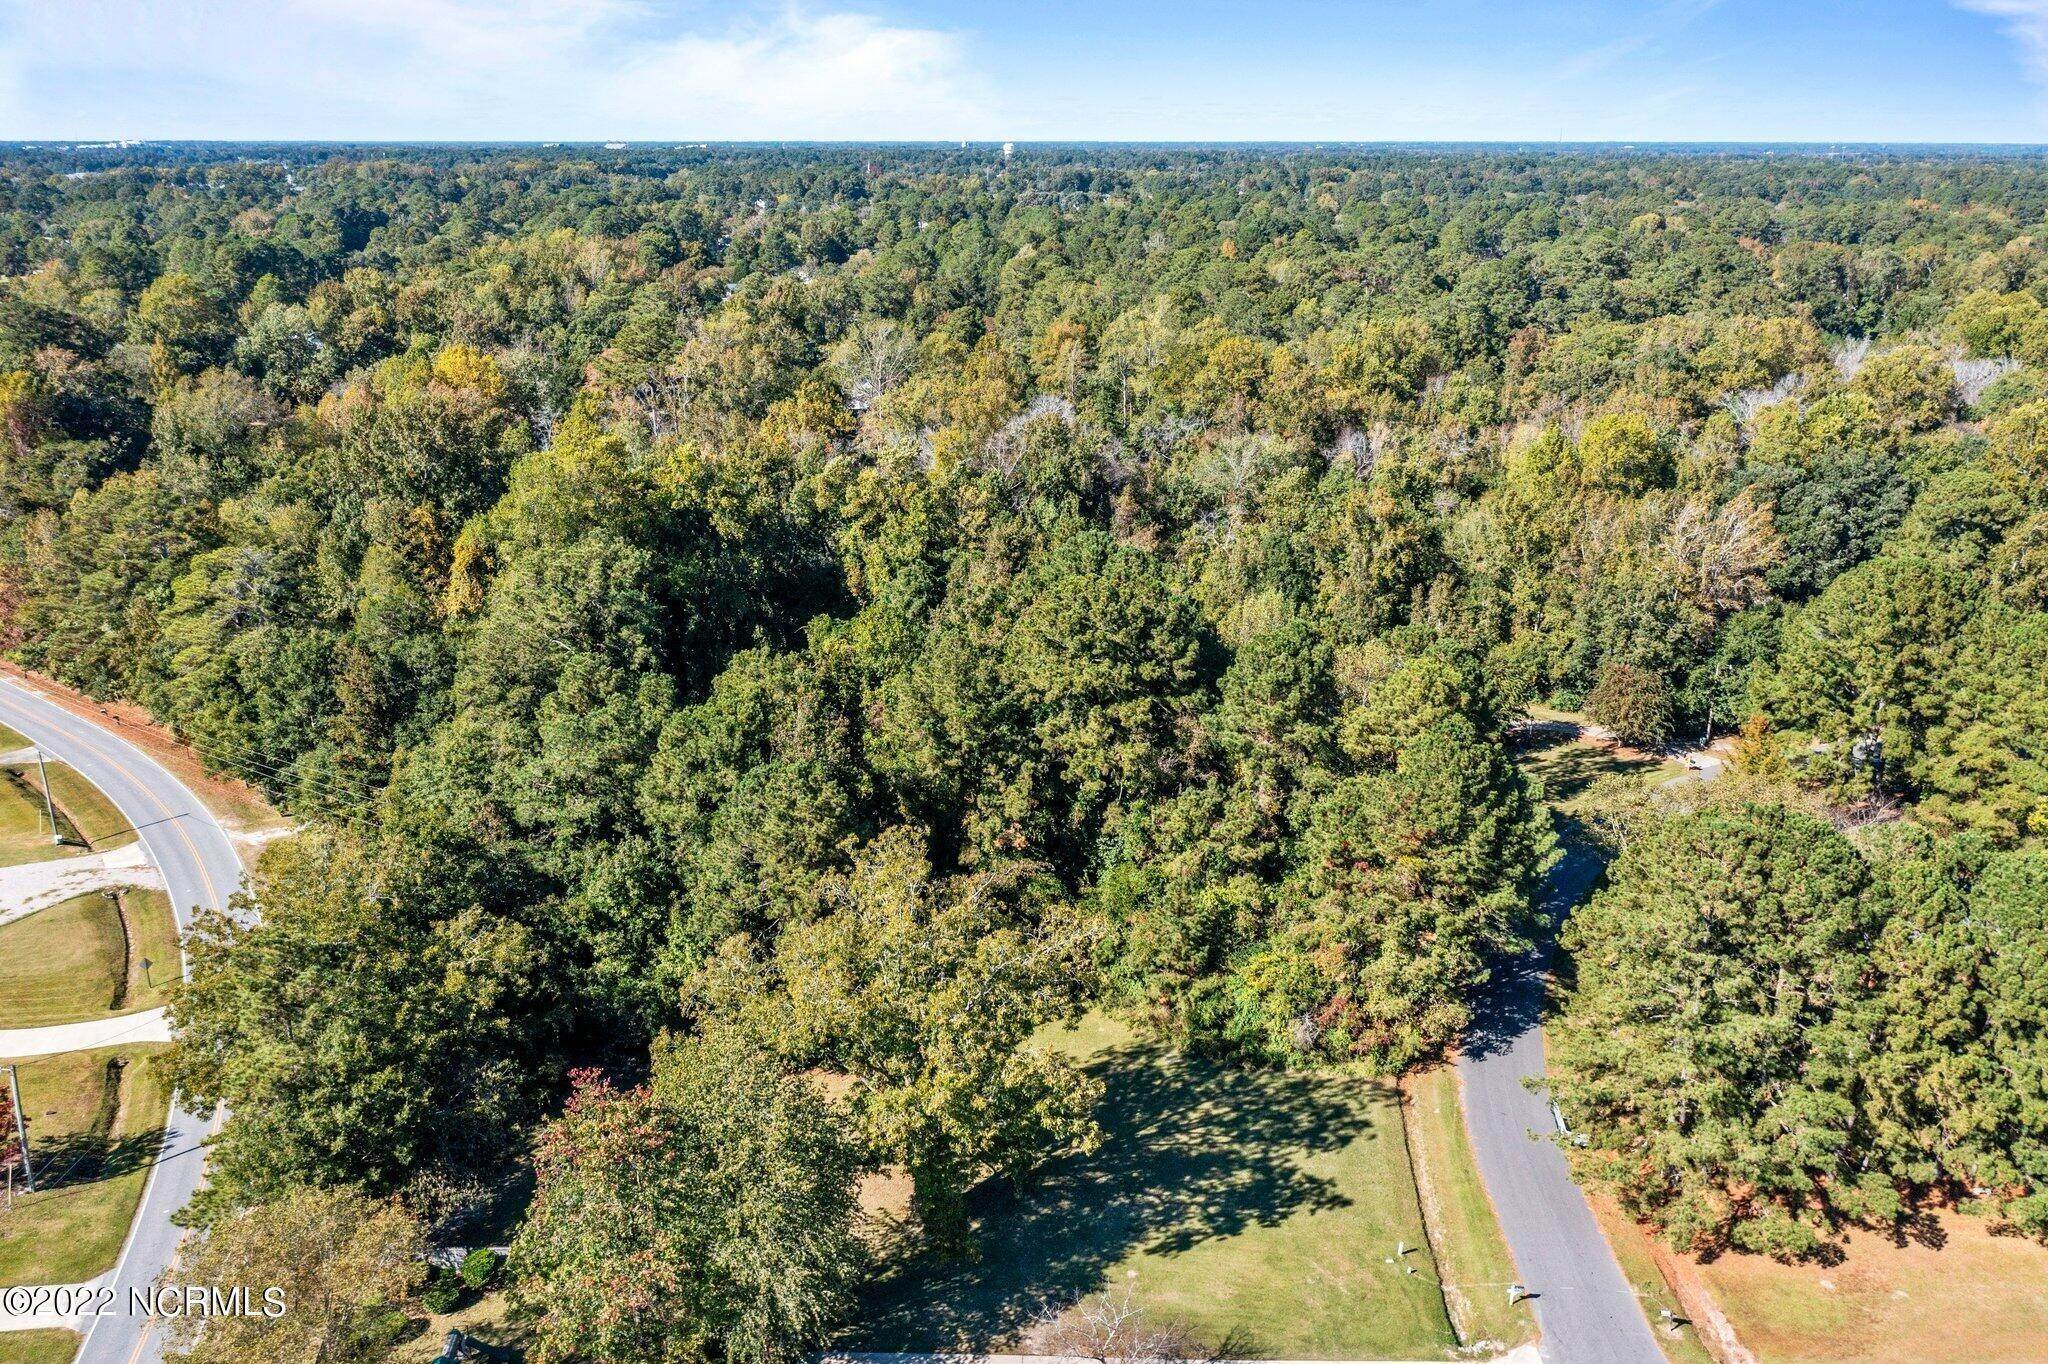 8. Land for Sale at Greenville, NC 27858